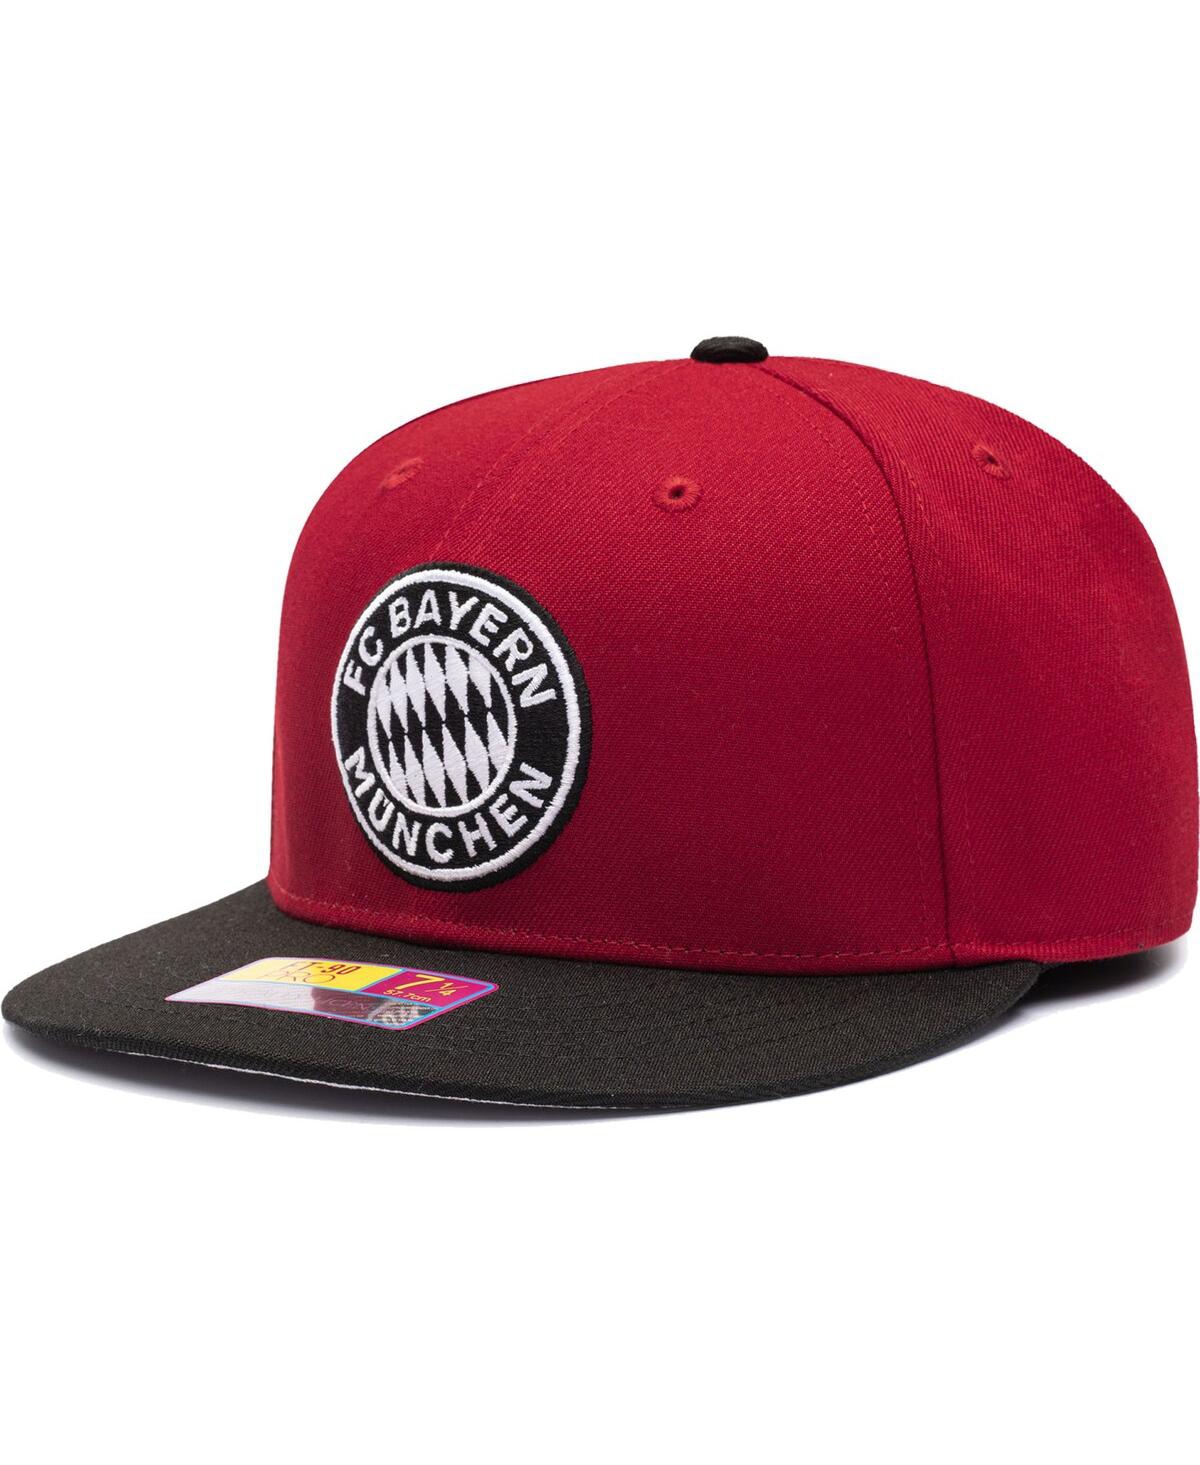 Men's Red, Black Bayern Munich America's Game Fitted Hat - Red, Black